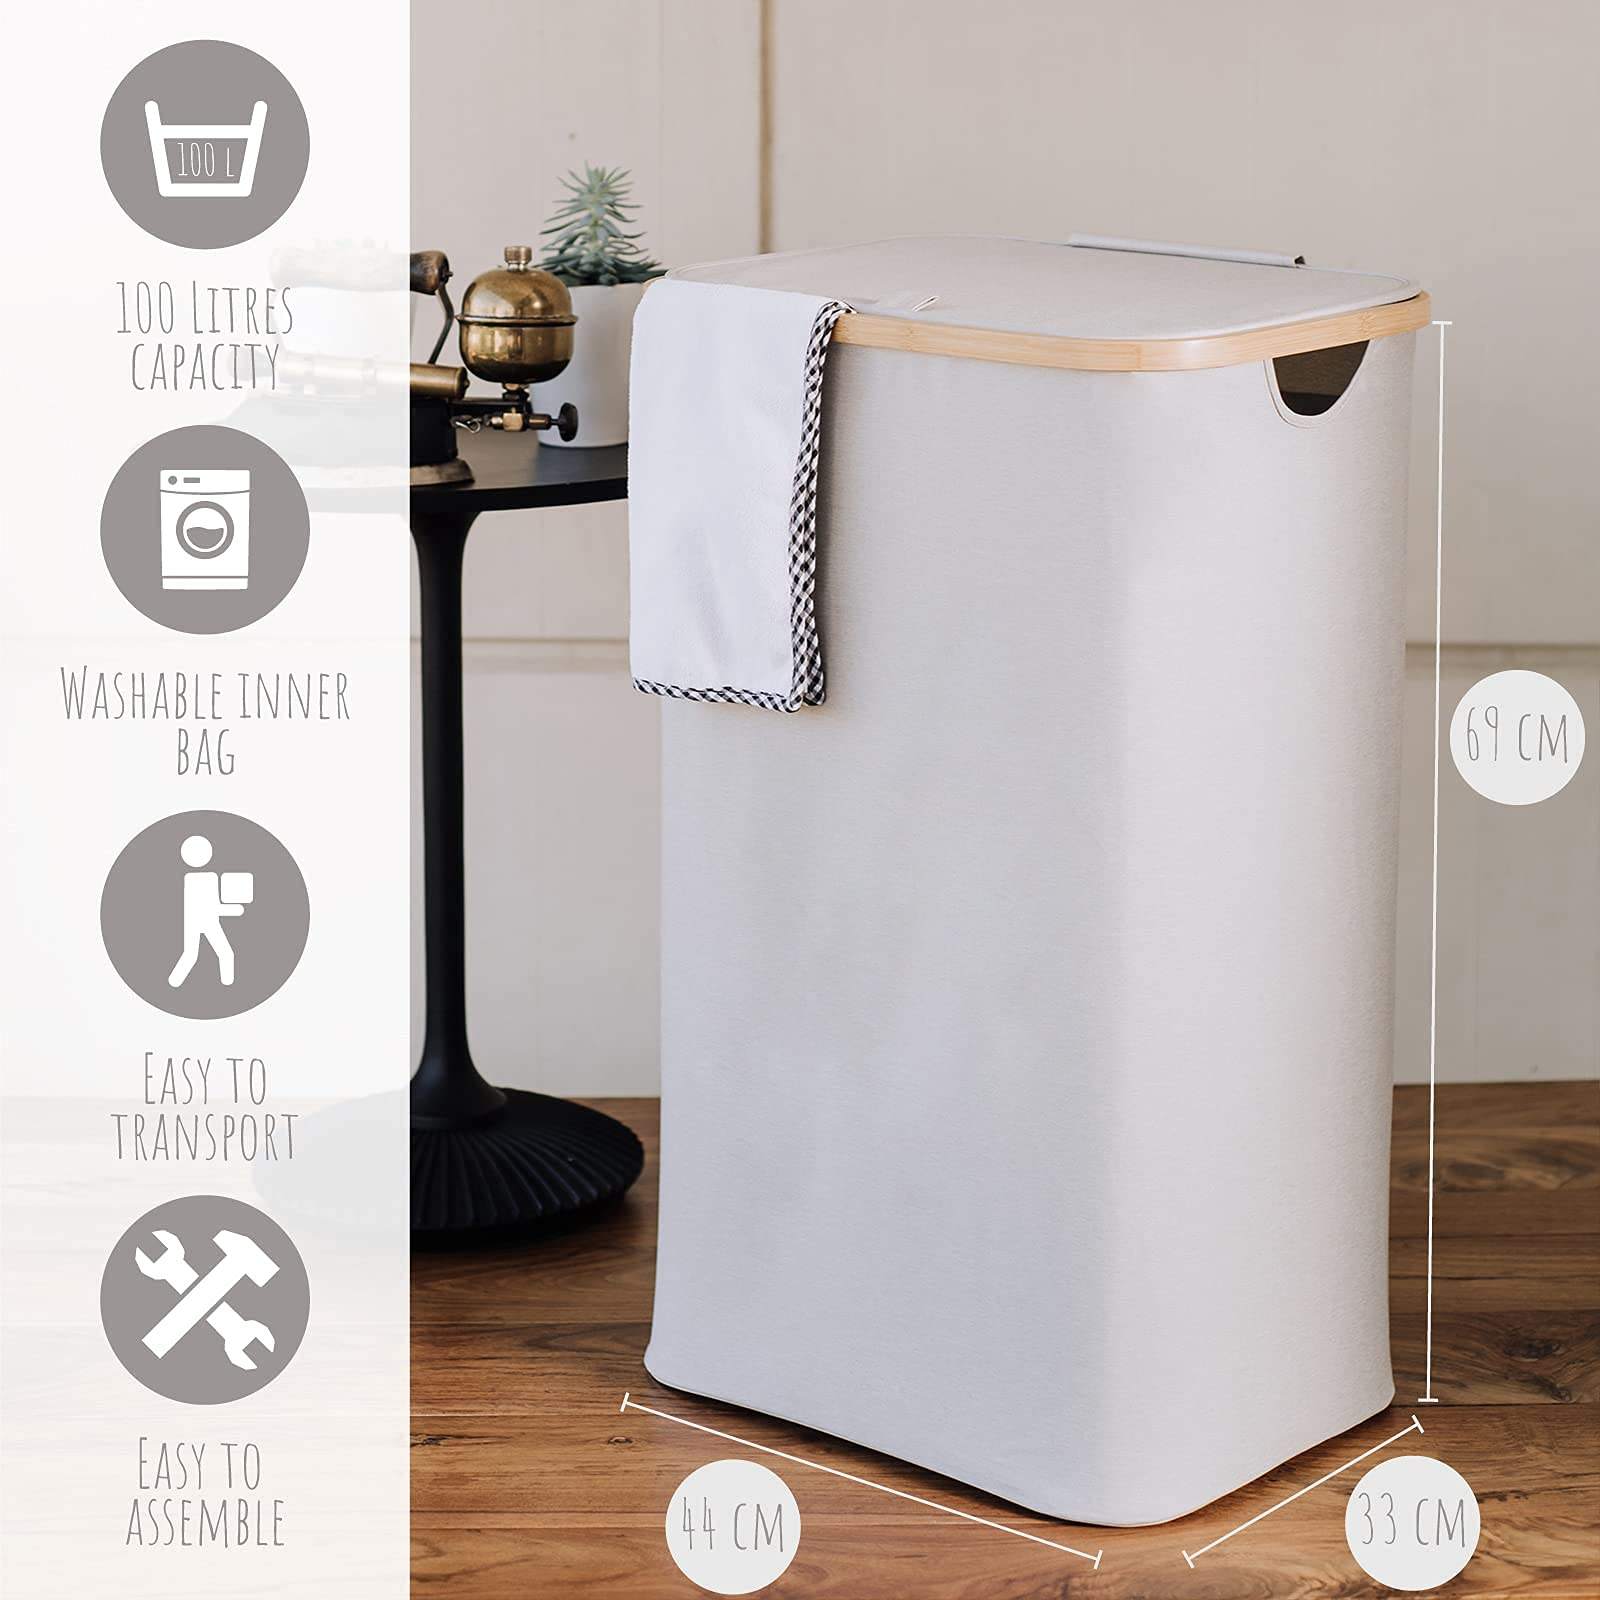 Wholesale 100 L Large Washing Baskets Bathroom Bin Bamboo Laundry Baskets with Handles Lid Removable laundry bag for Bedrooms